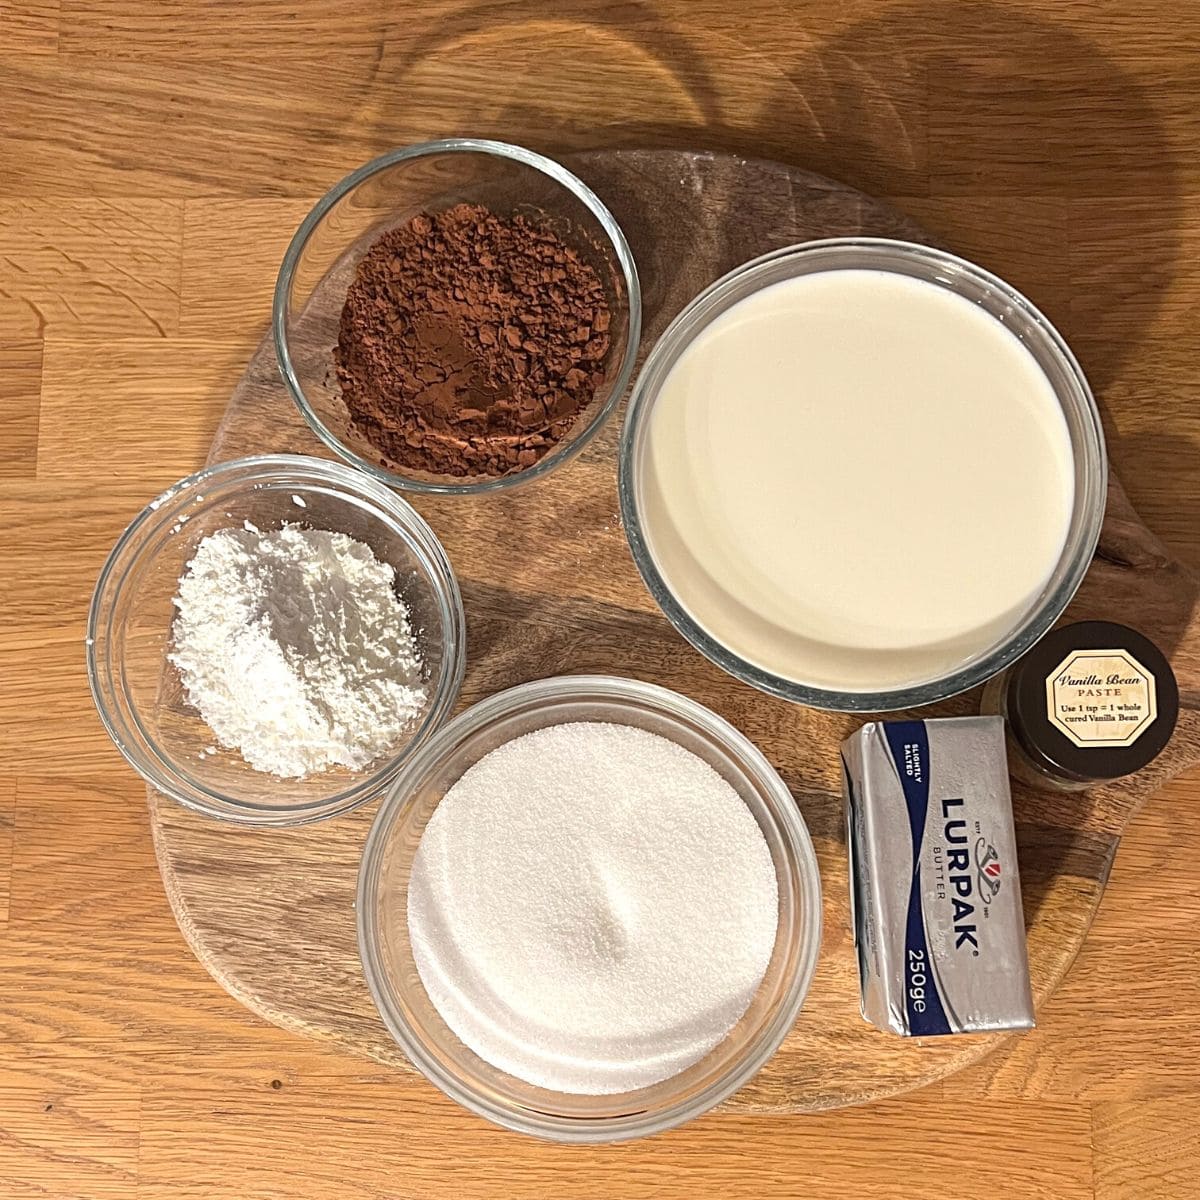 Chocolate pudding ingredients in small bowls on wooden counter.